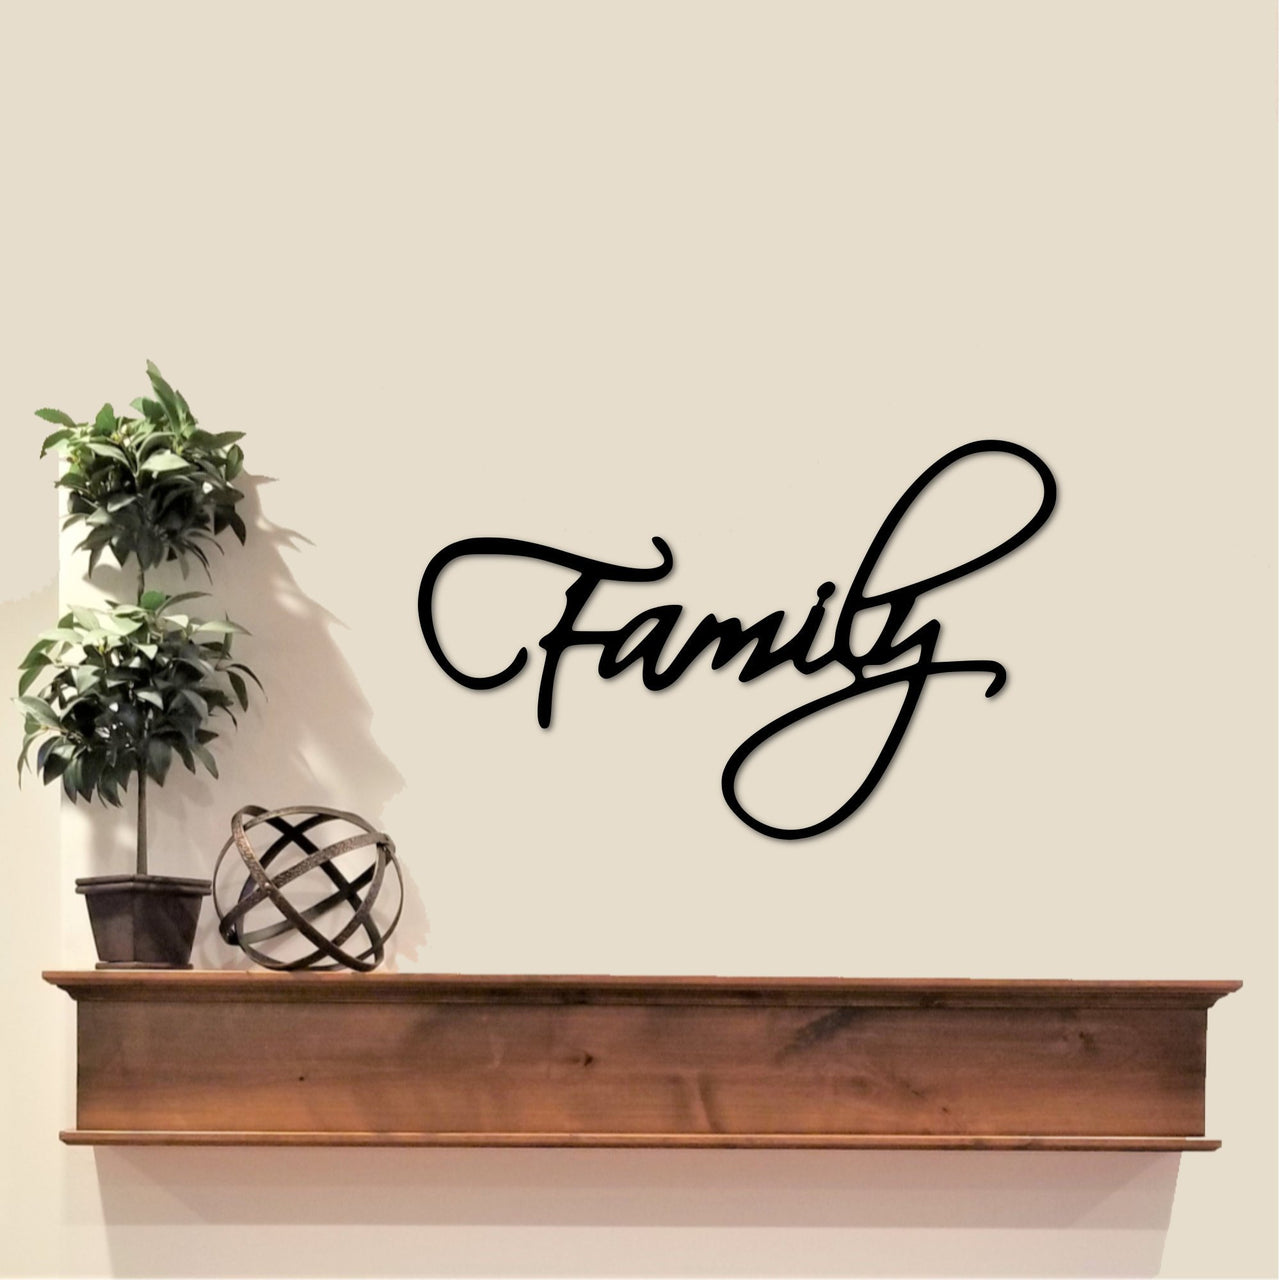 Family Sign | Metal Words for the Wall | Metal Wall Art | Metal Wall Words | Gallery Wall Decor | Metal Word Signs for Living Room